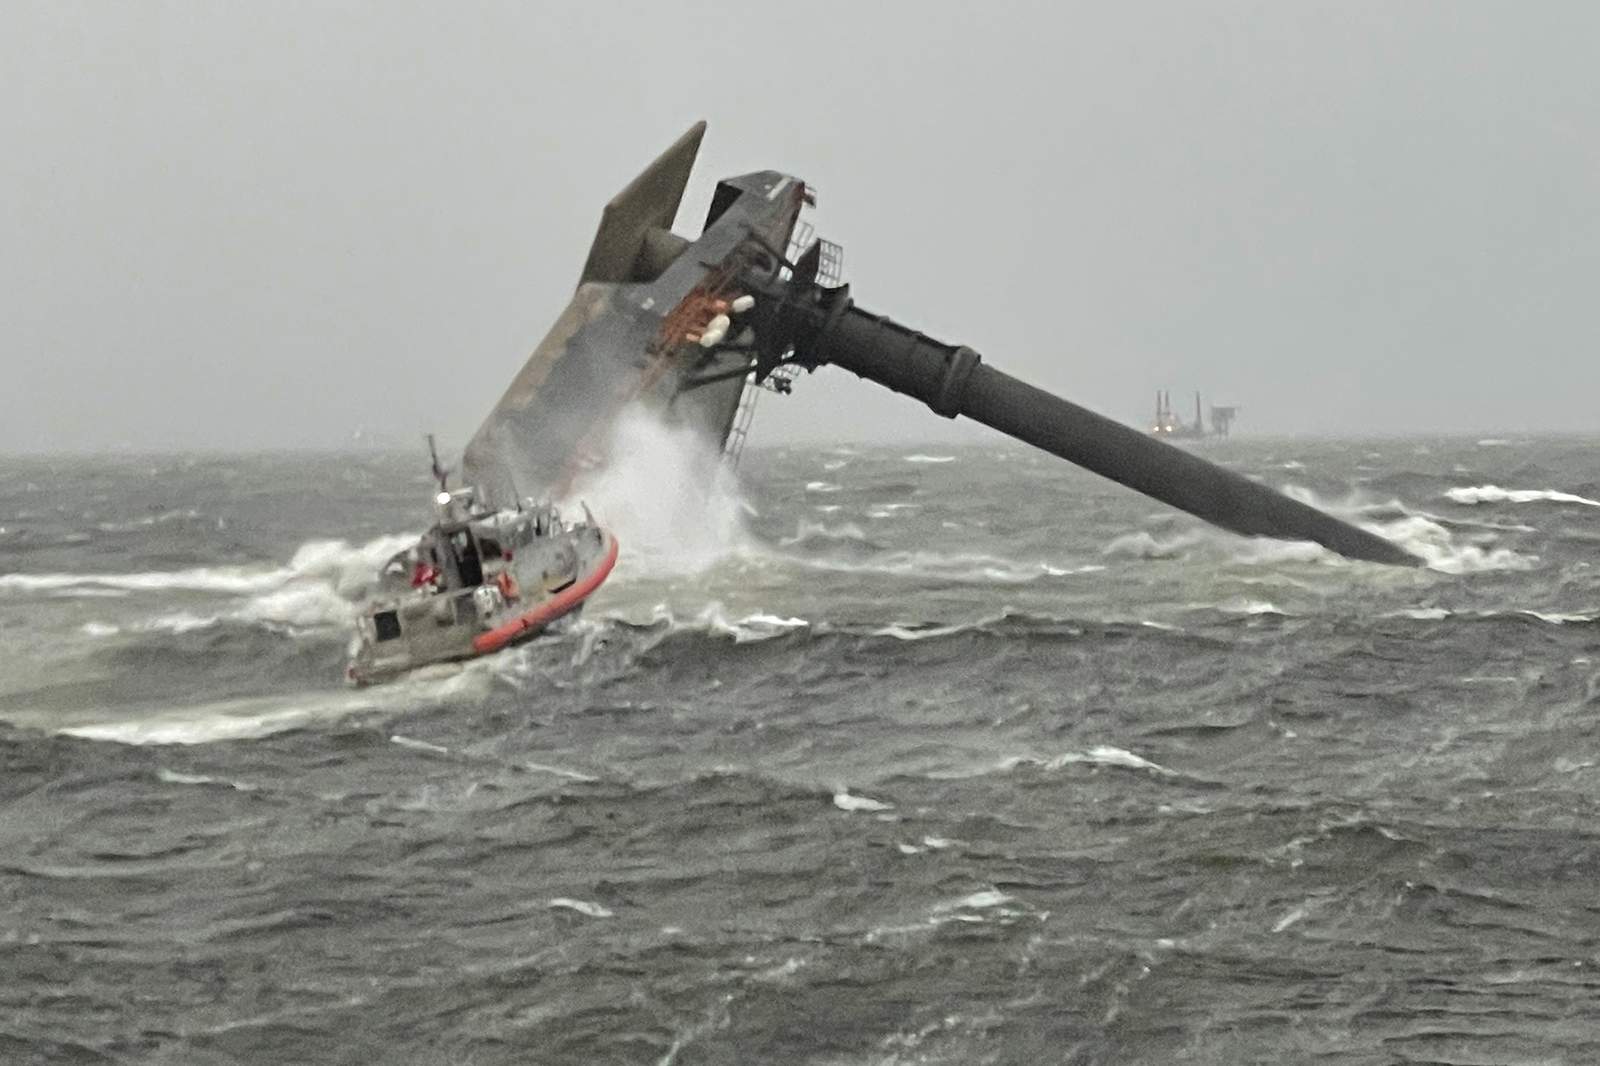 6 rescued, 1 found dead, more sought as 265-foot ship capsizes off Louisiana